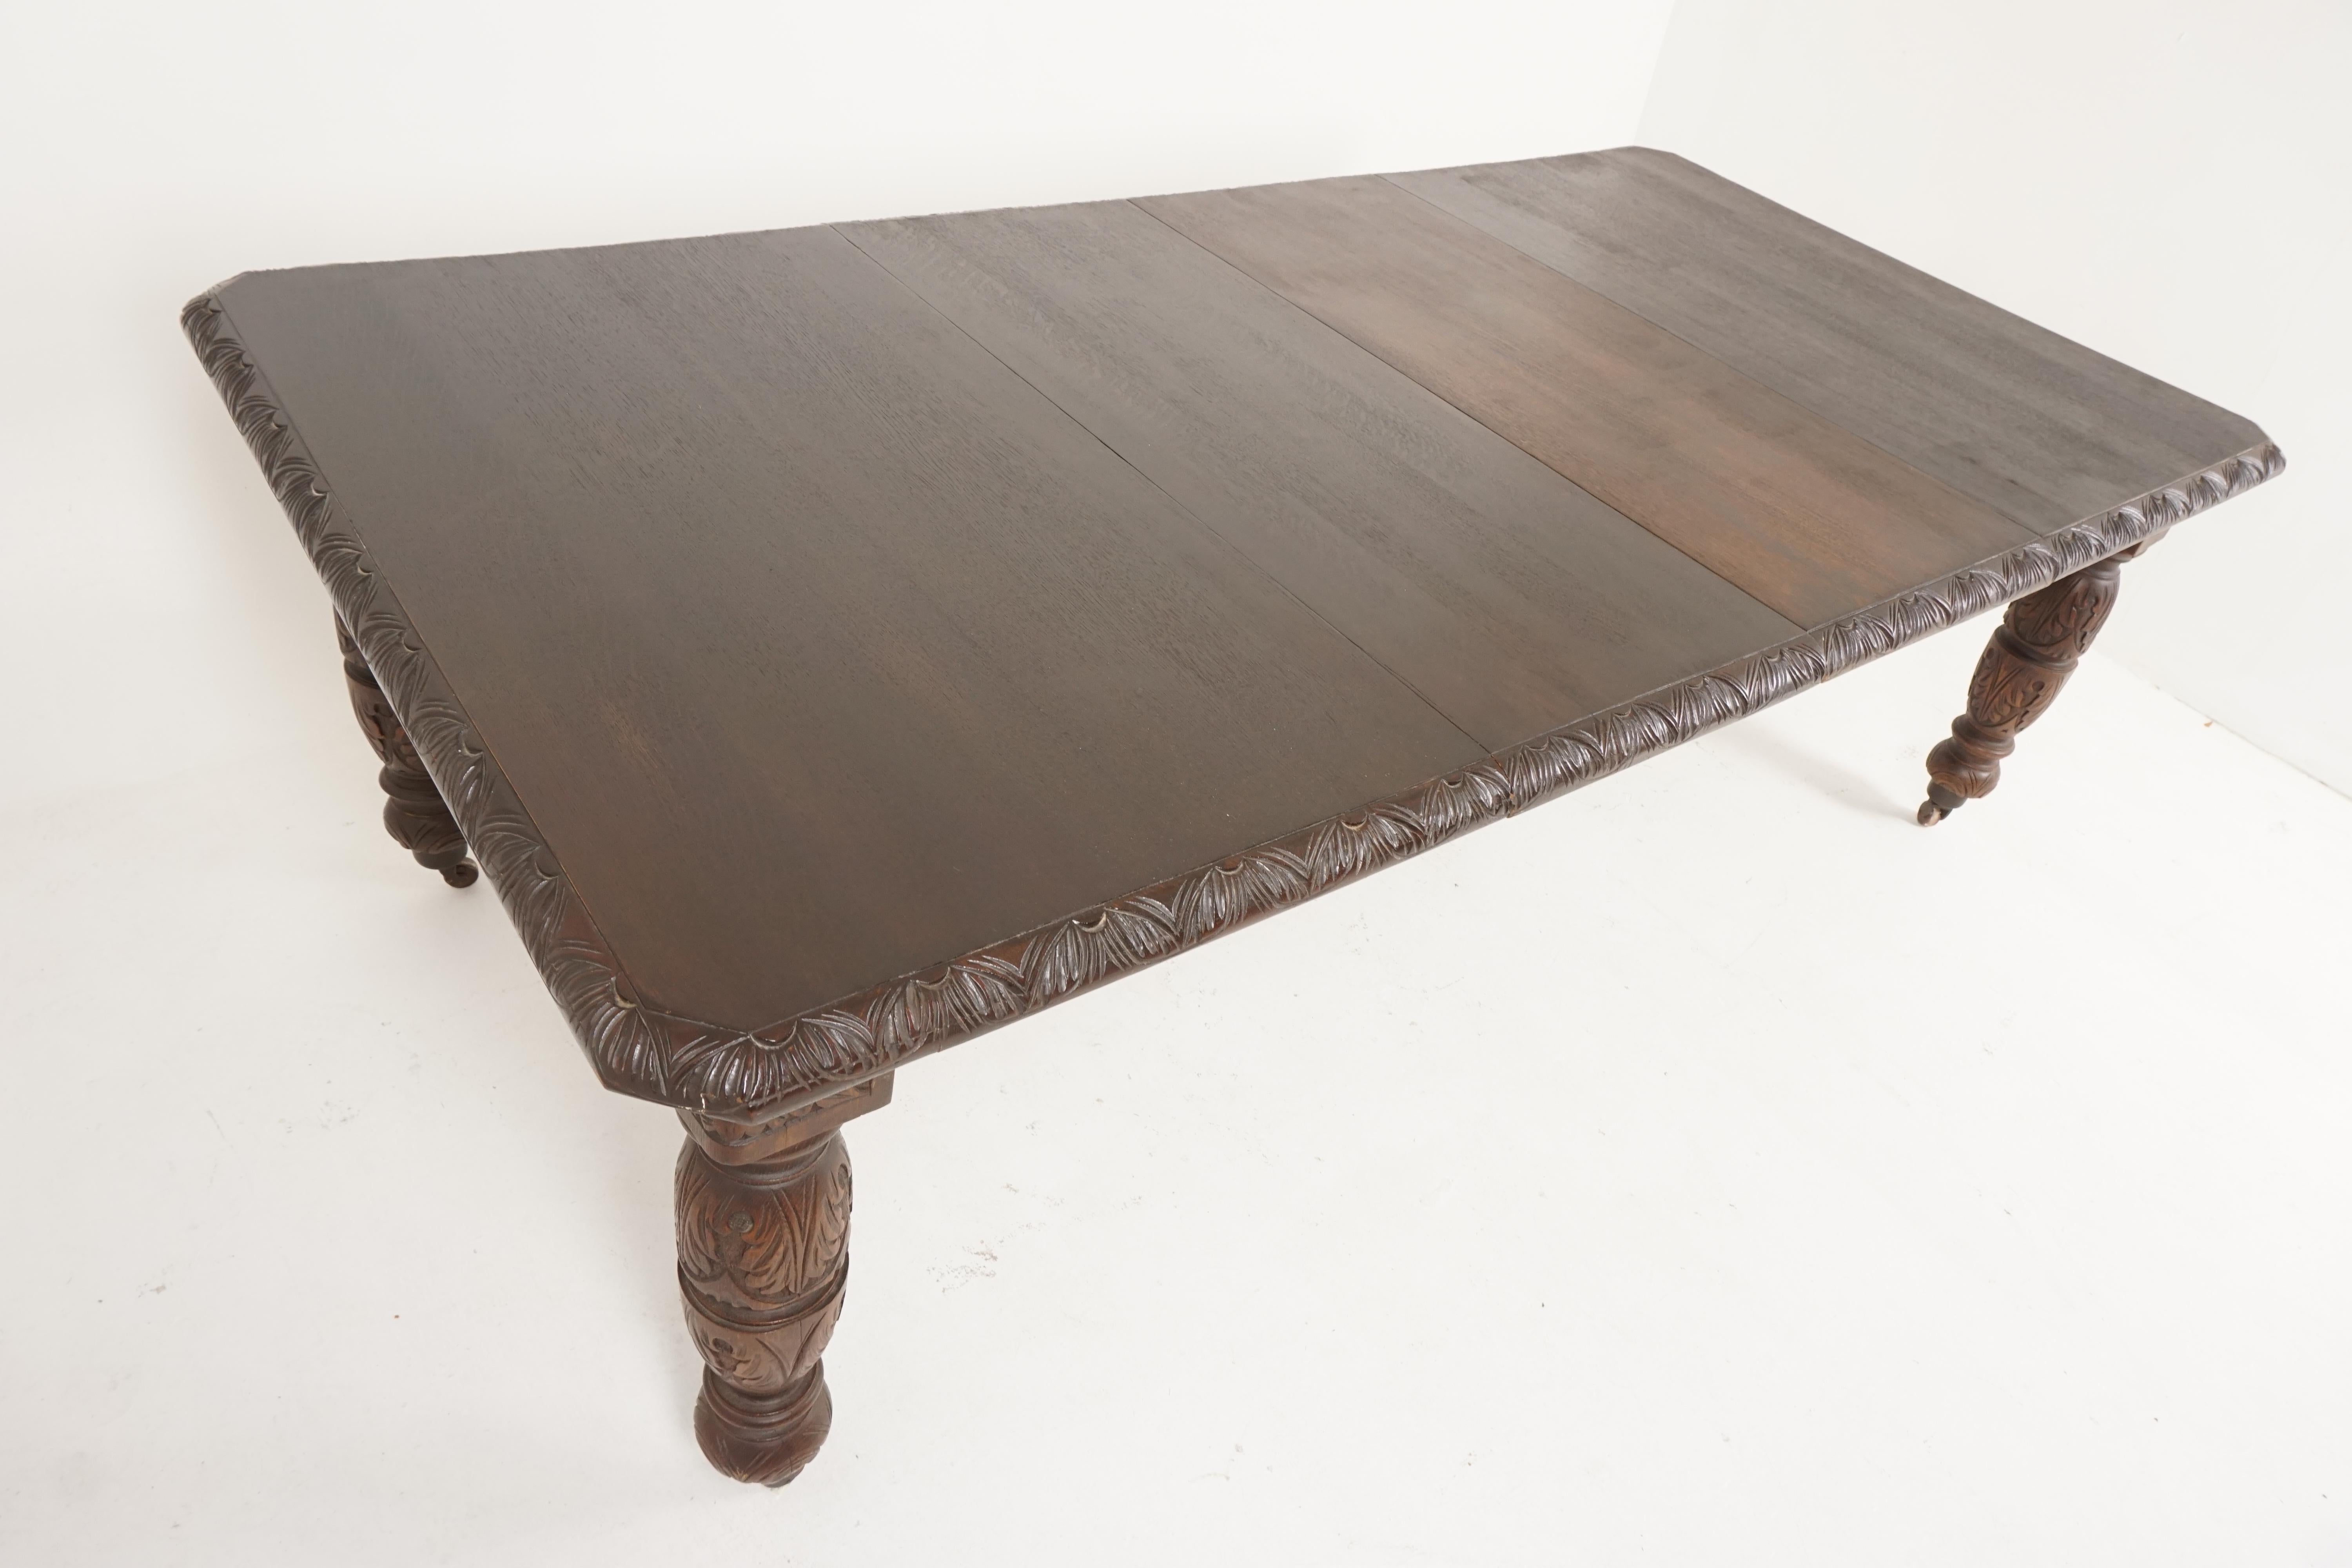 Large antique table, Victorian dining table, carved oak, extending Gothic style dining table, Scotland 1880, B2474

Scotland 1880
Solid oak
Rectangular top has canted ends
With a carved moulding around the top
All standing on four well carved